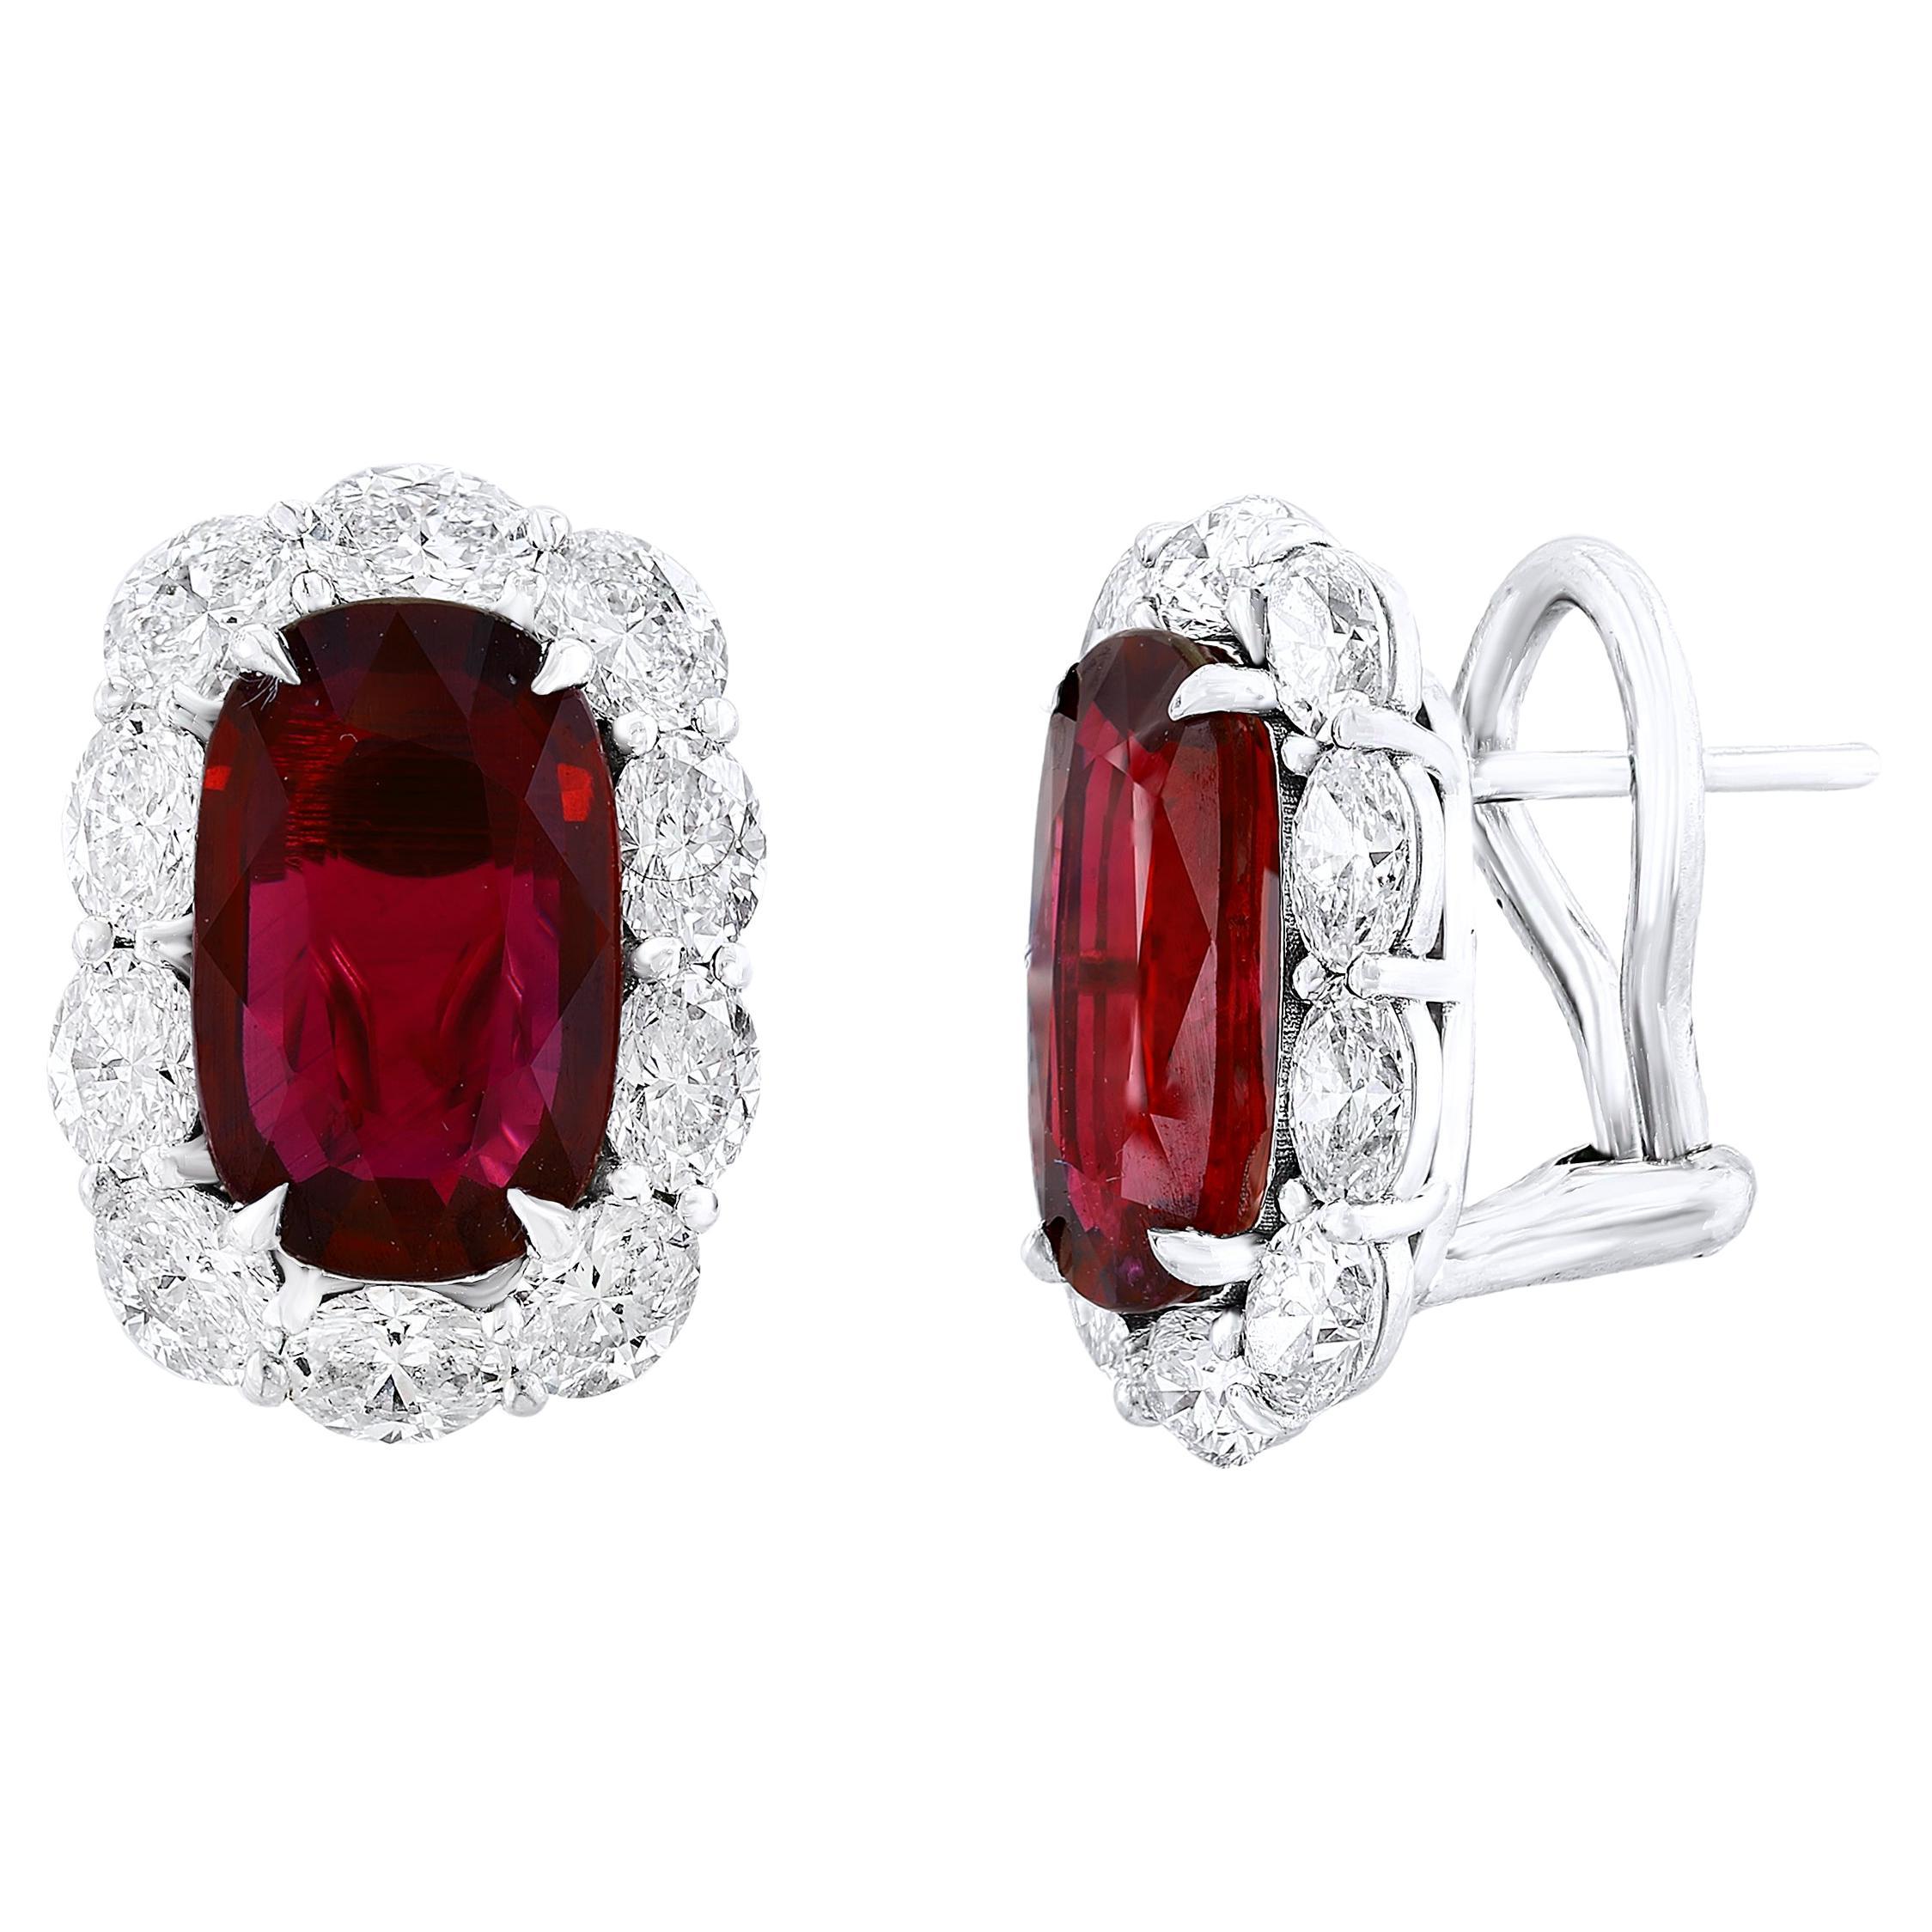 CERTIFIED 6.15 Carat Cushion Cut Ruby and Diamond Halo Earring in 18K White Gold For Sale